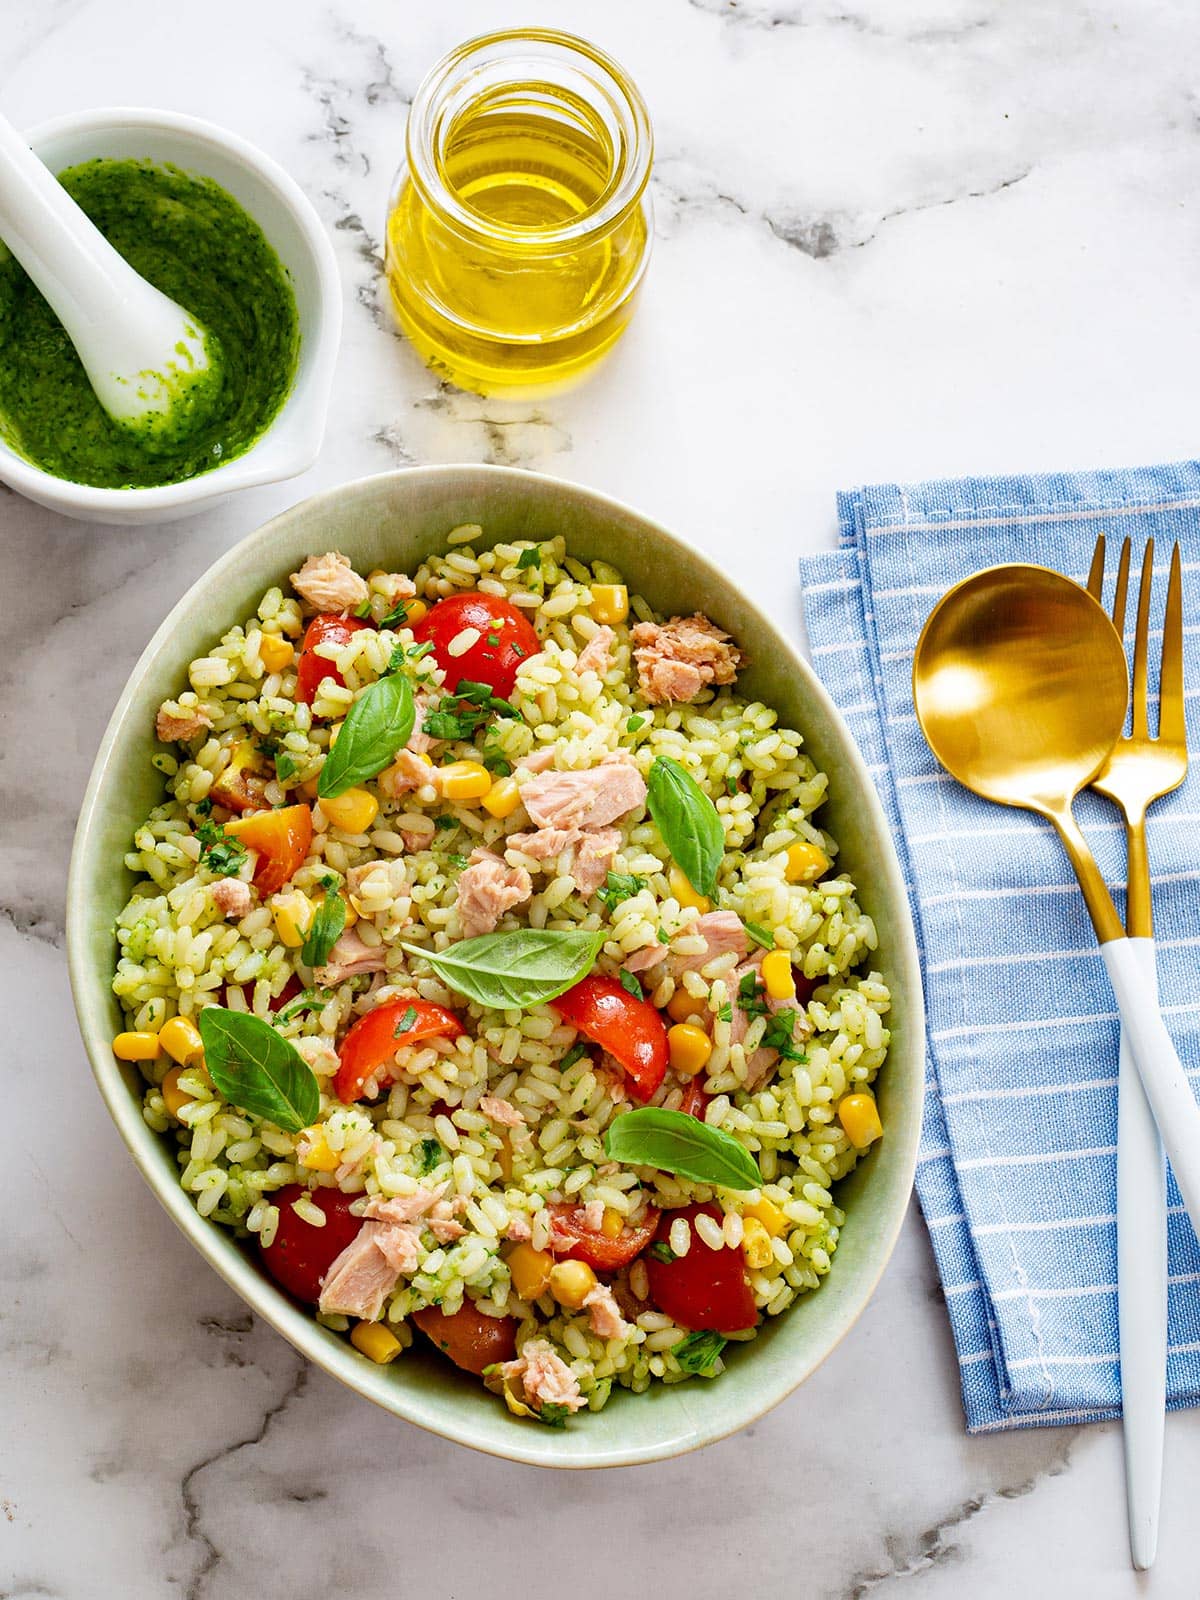 Pesto rice salad on a bowl with some ingredients scattered around.